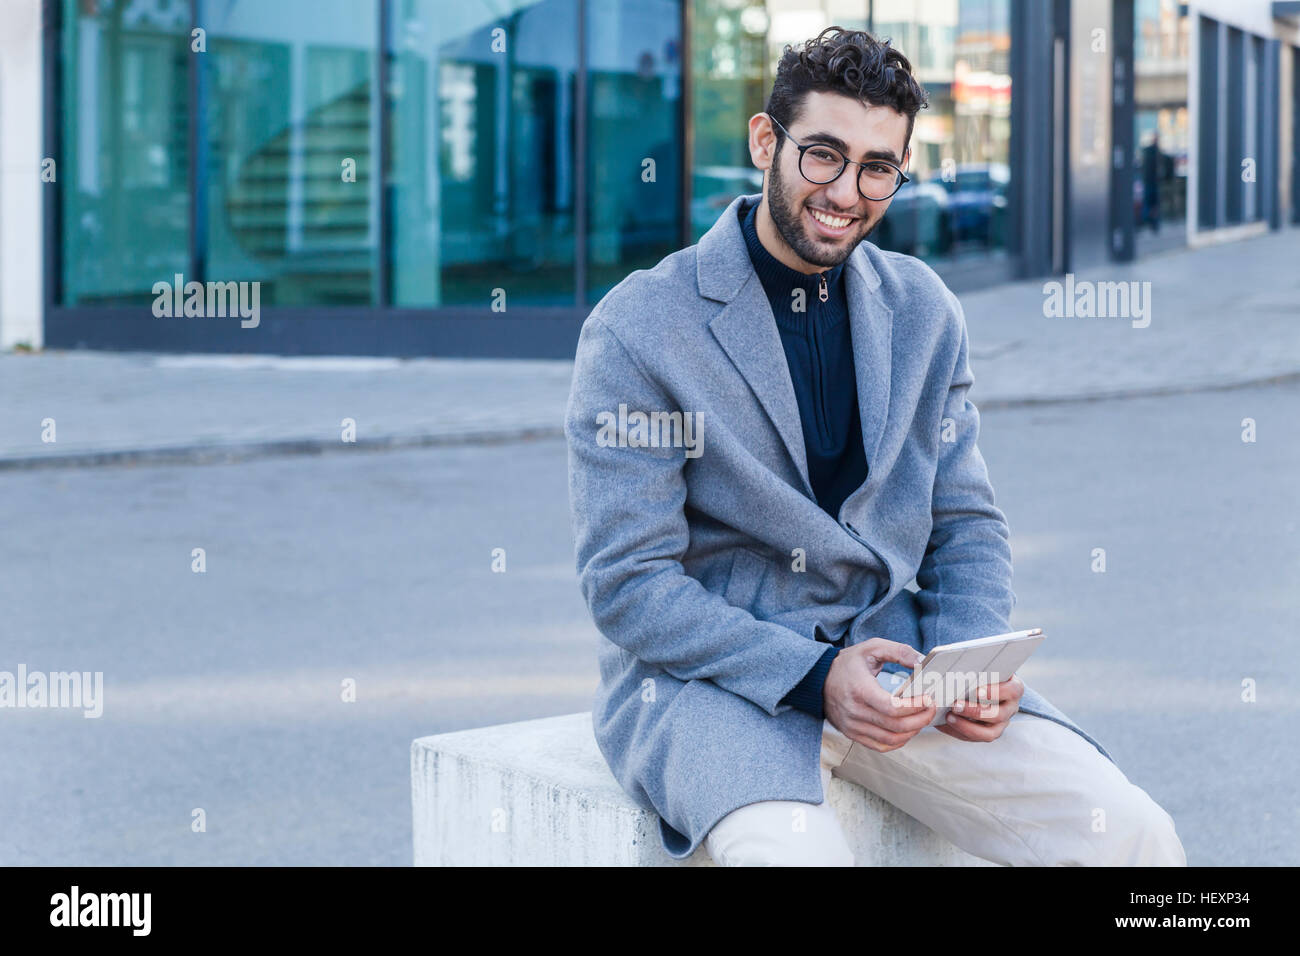 Portrait of smiling young man with mini tablet sitting on bollard Stock Photo